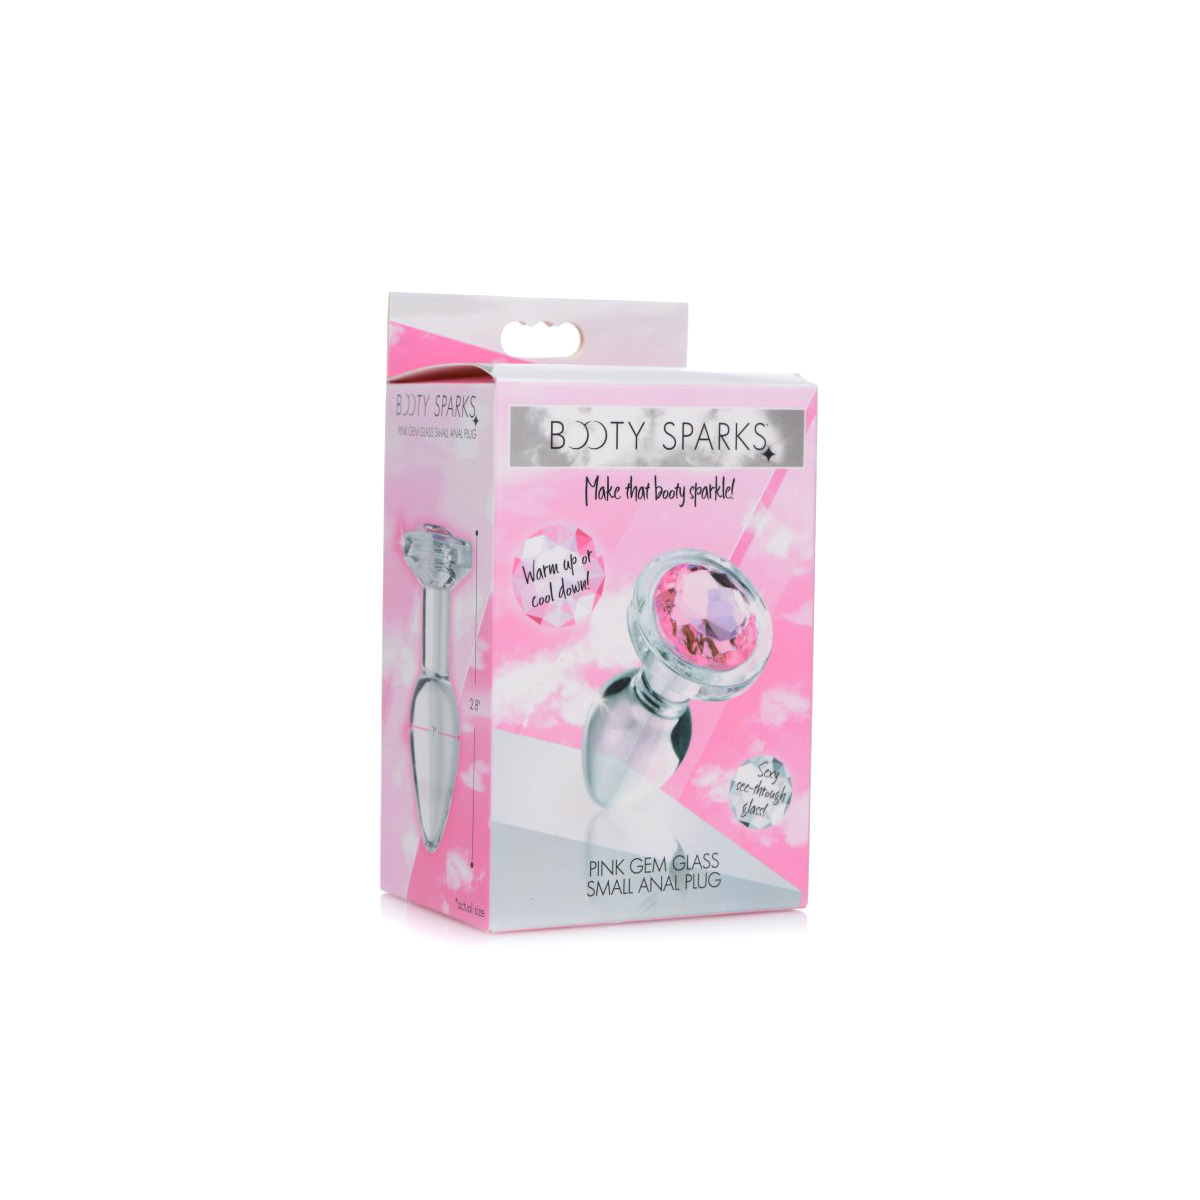 Pink-Gem-Glass-Anal-Plug-Small-118-XR-AG430-Small-1